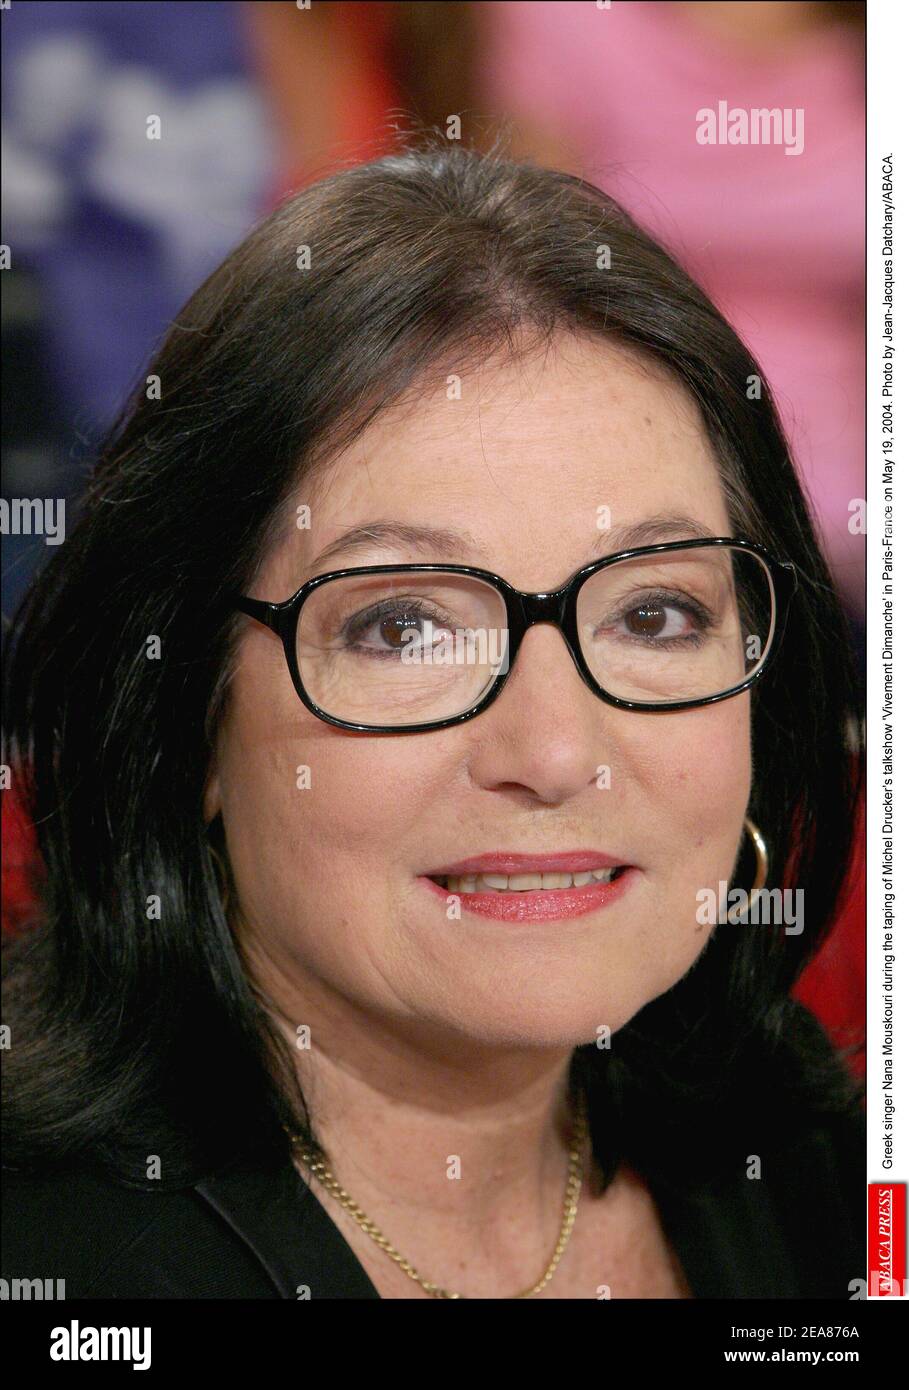 Greek singer Nana Mouskouri during the taping of Michel Drucker's talkshow 'Vivement Dimanche' in Paris-France on May 19, 2004. Photo by Jean-Jacques Datchary/ABACA. Stock Photo